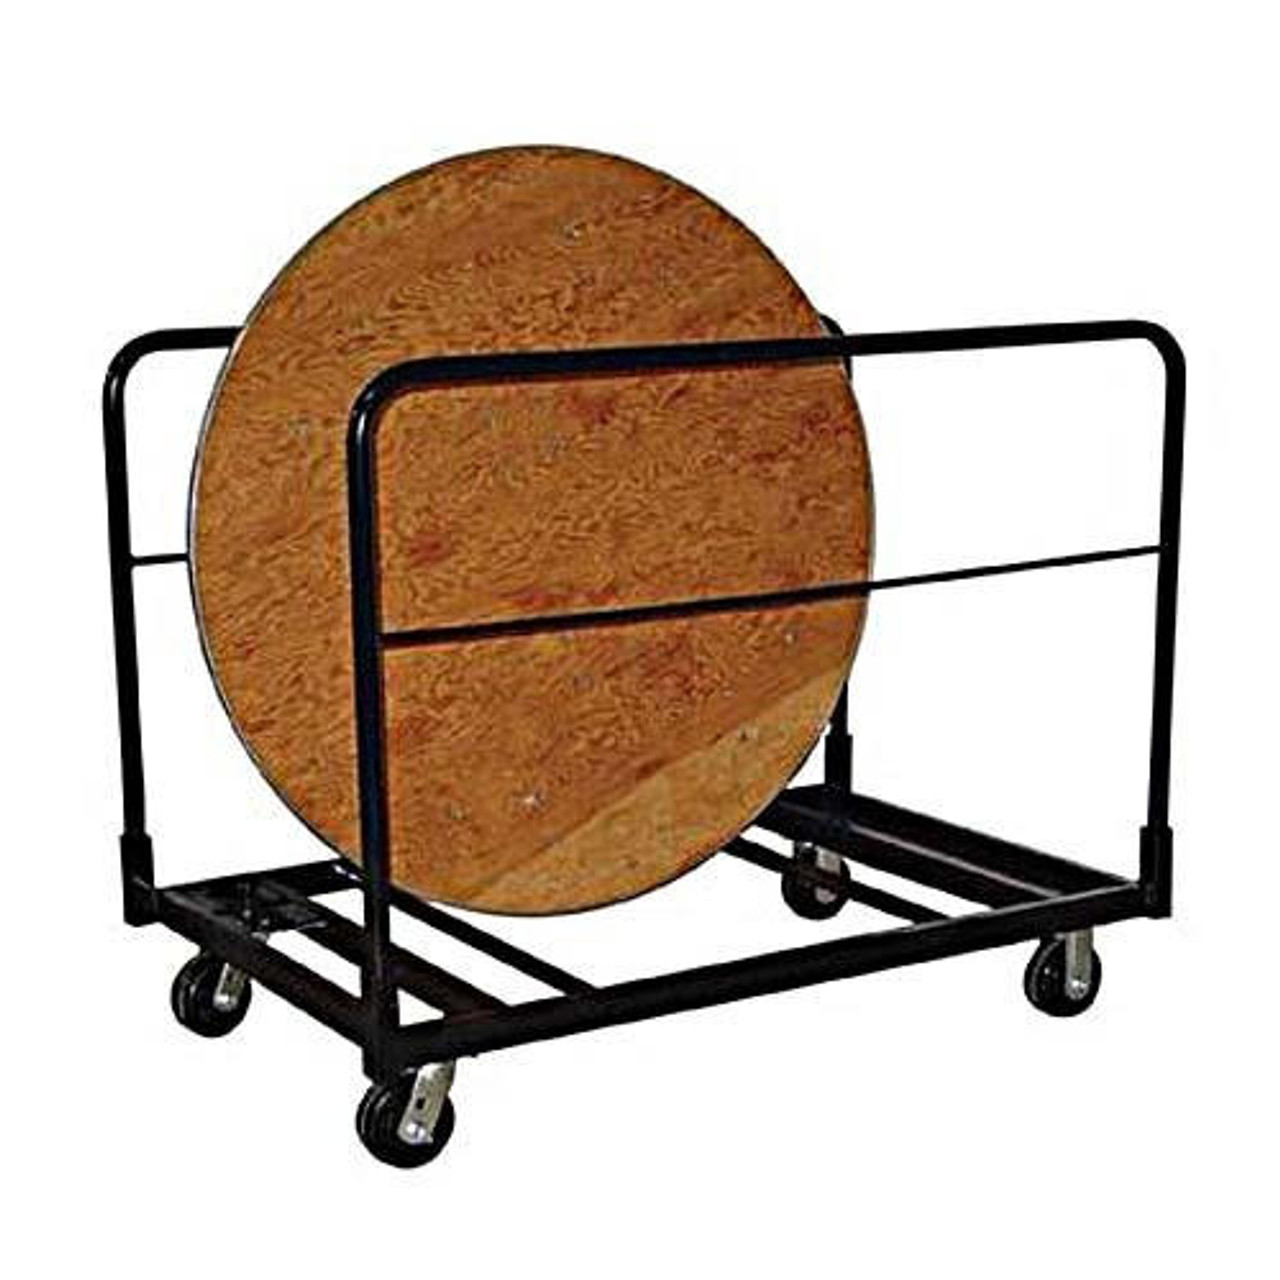 https://www.shifflerequip.com/rectangular-round-table-mover-for-8-10-tables-33w-x-54l-x-42h-5-casters-2-swivel-and-2-rigid/